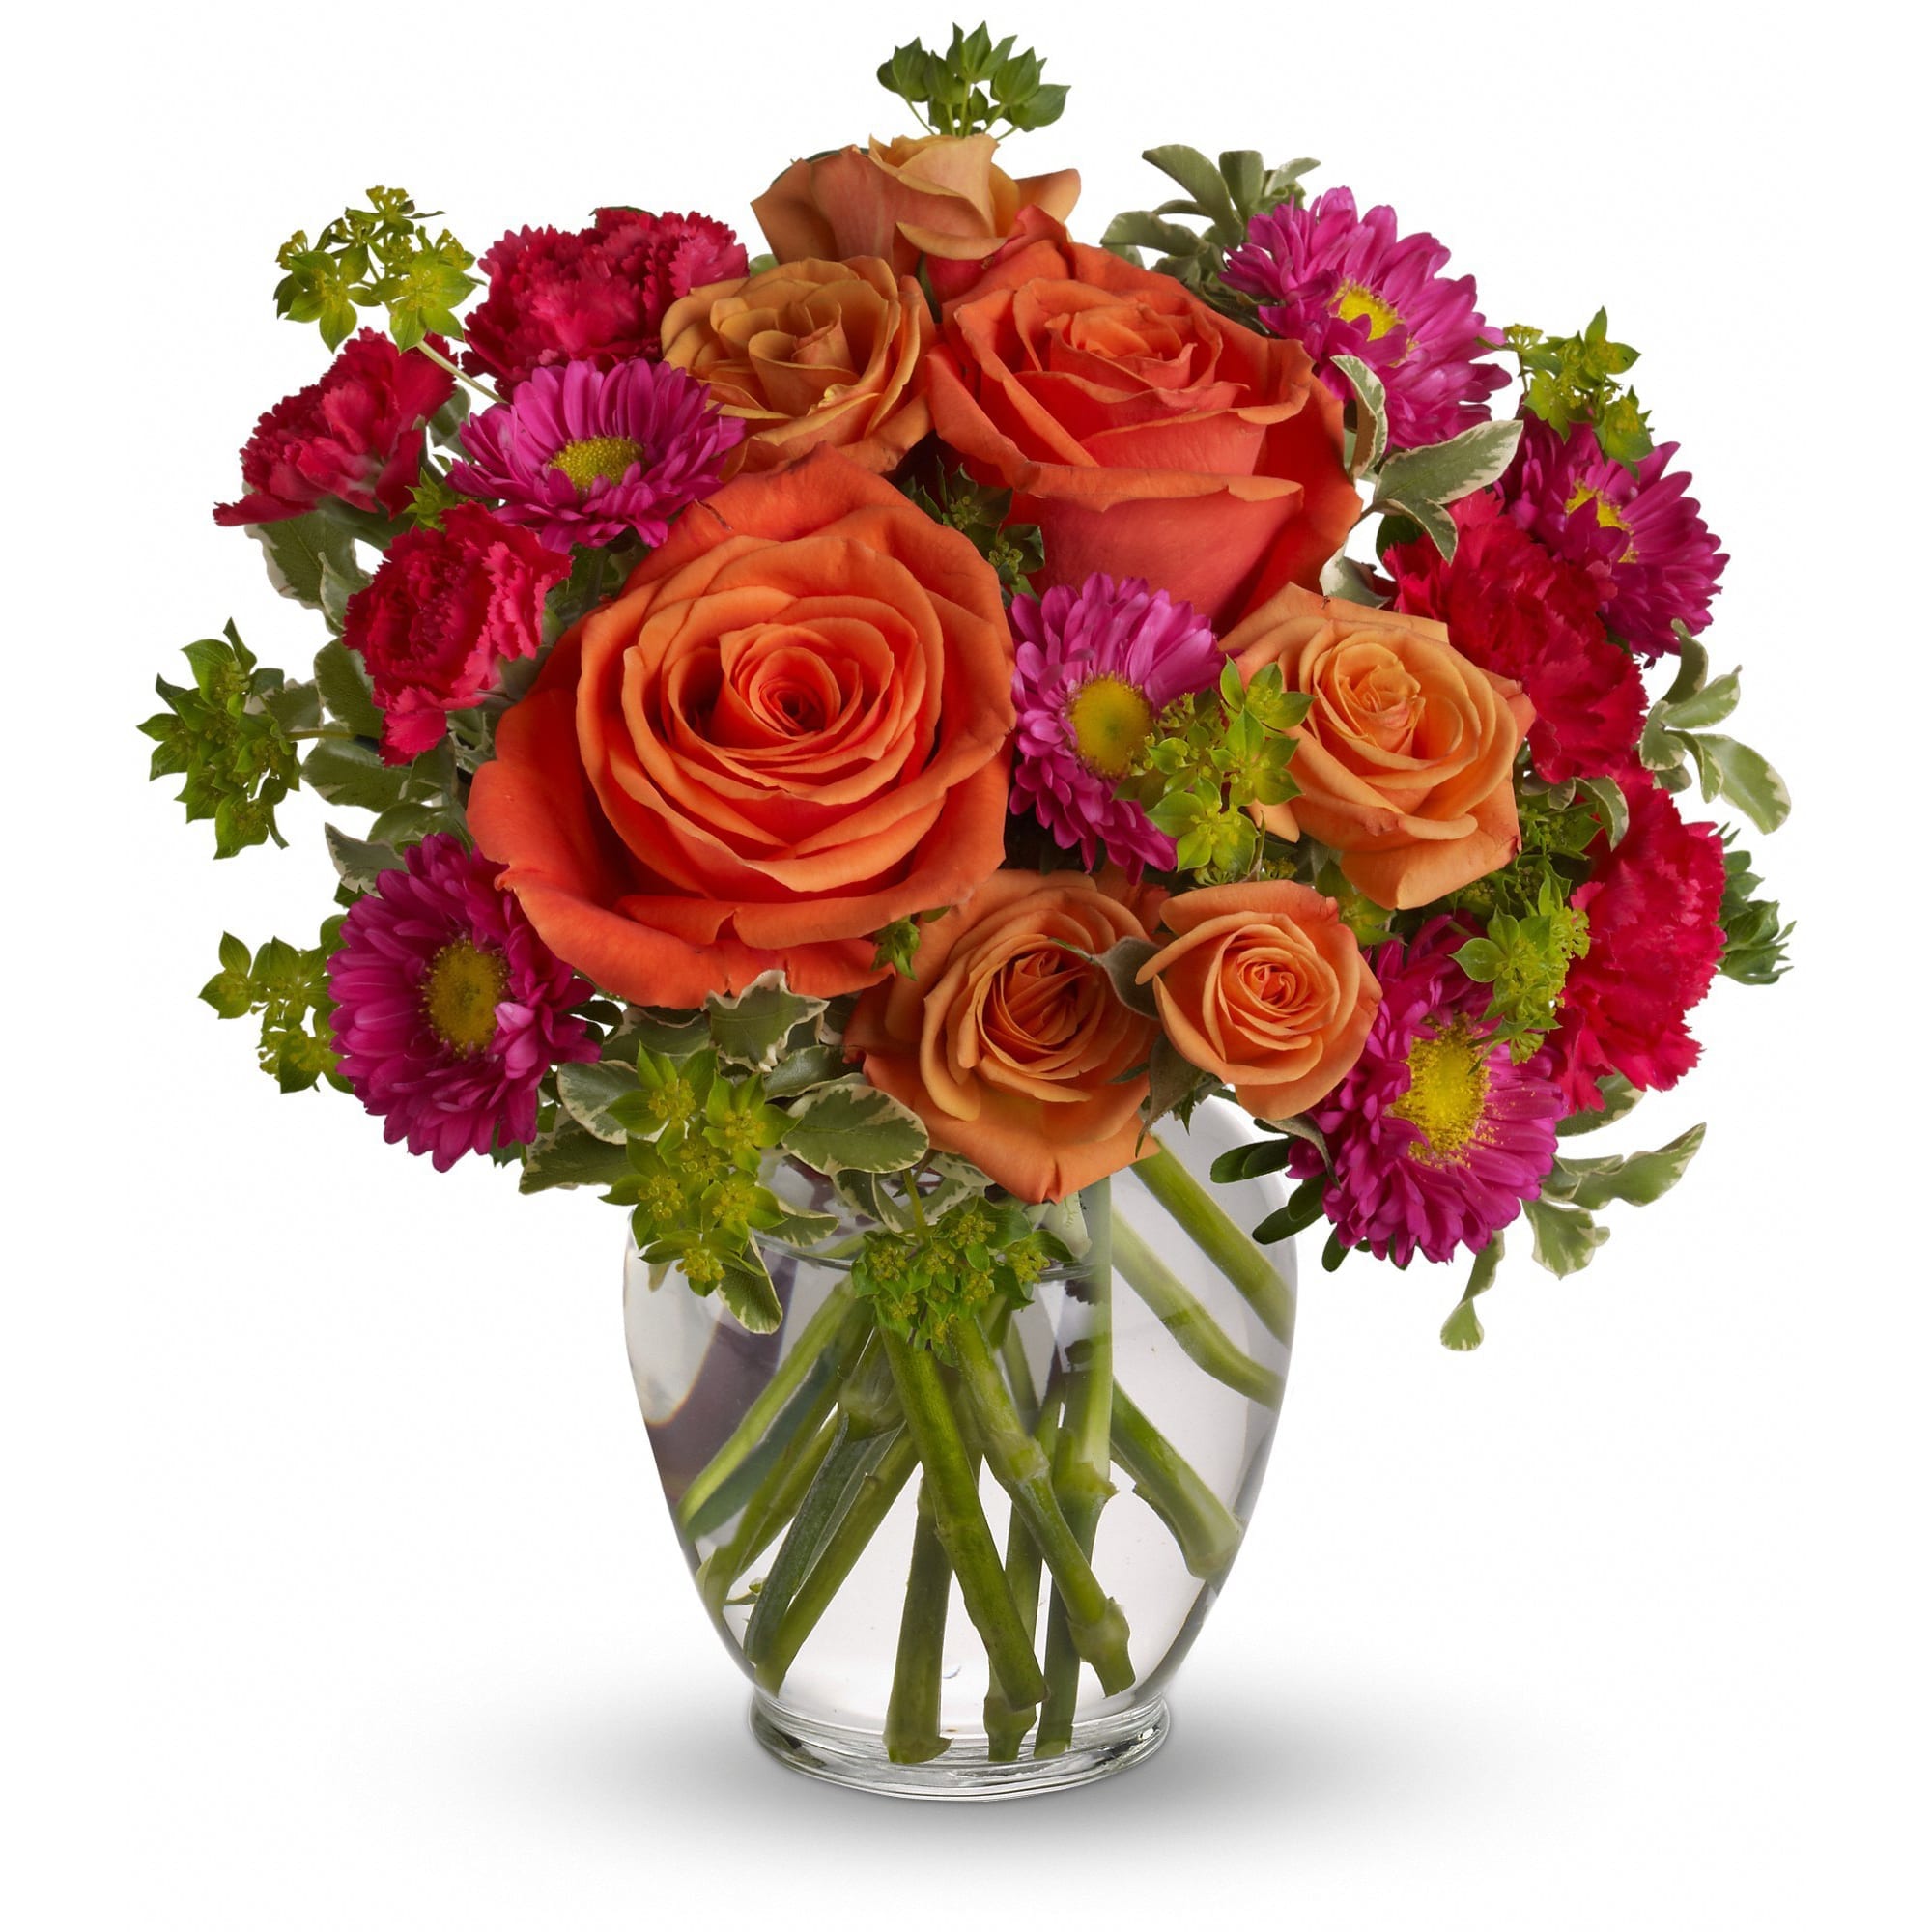 How Sweet It Is By Teleflora - How sweet it will be when this dazzling arrangement arrives at someone's door. Very vibrant. Very vivacious. And very, very pretty.